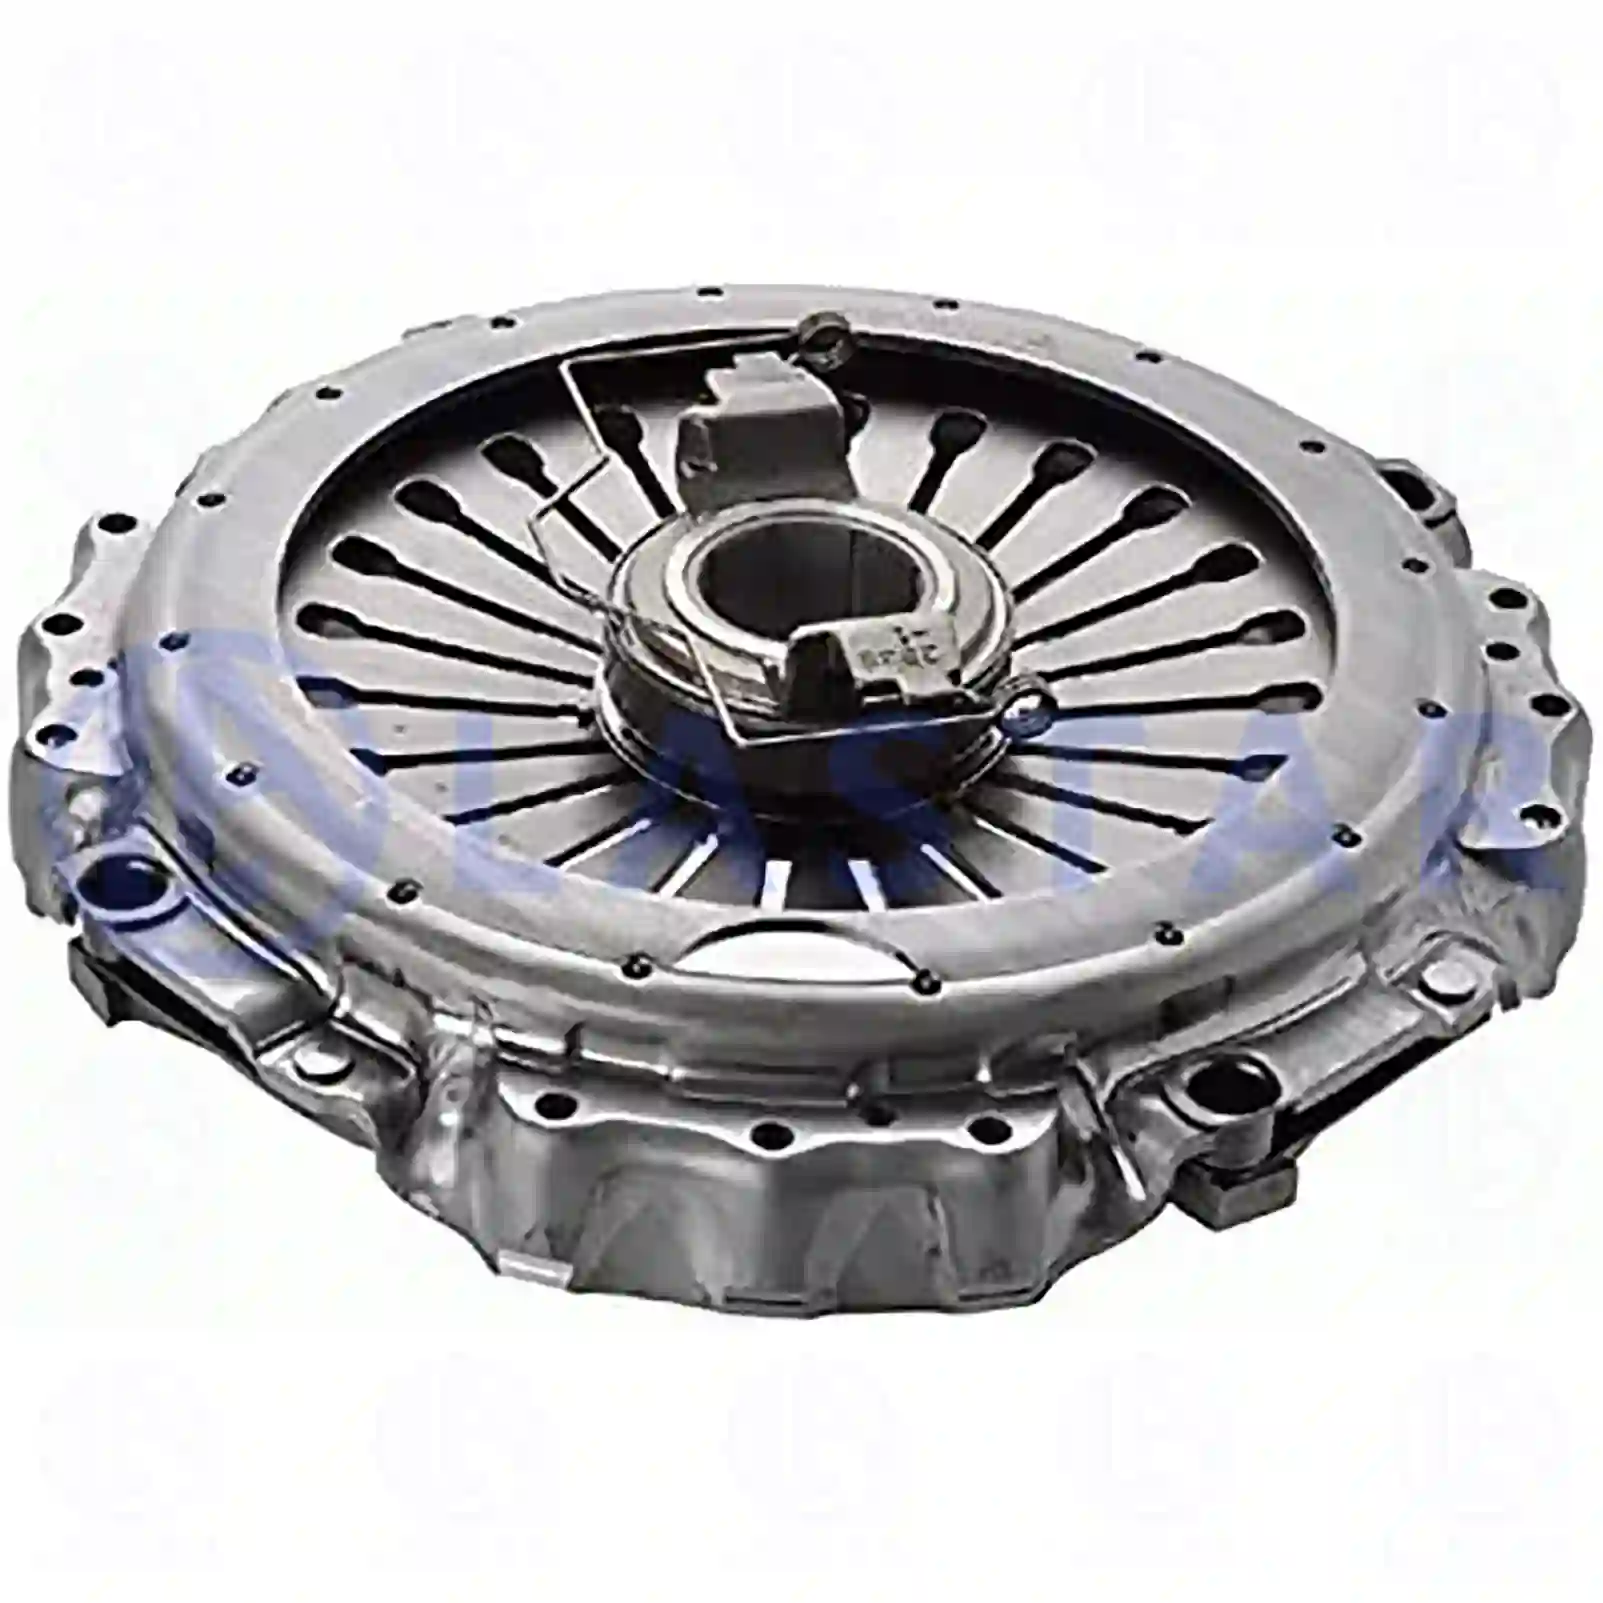  Clutch cover, with release bearing || Lastar Spare Part | Truck Spare Parts, Auotomotive Spare Parts